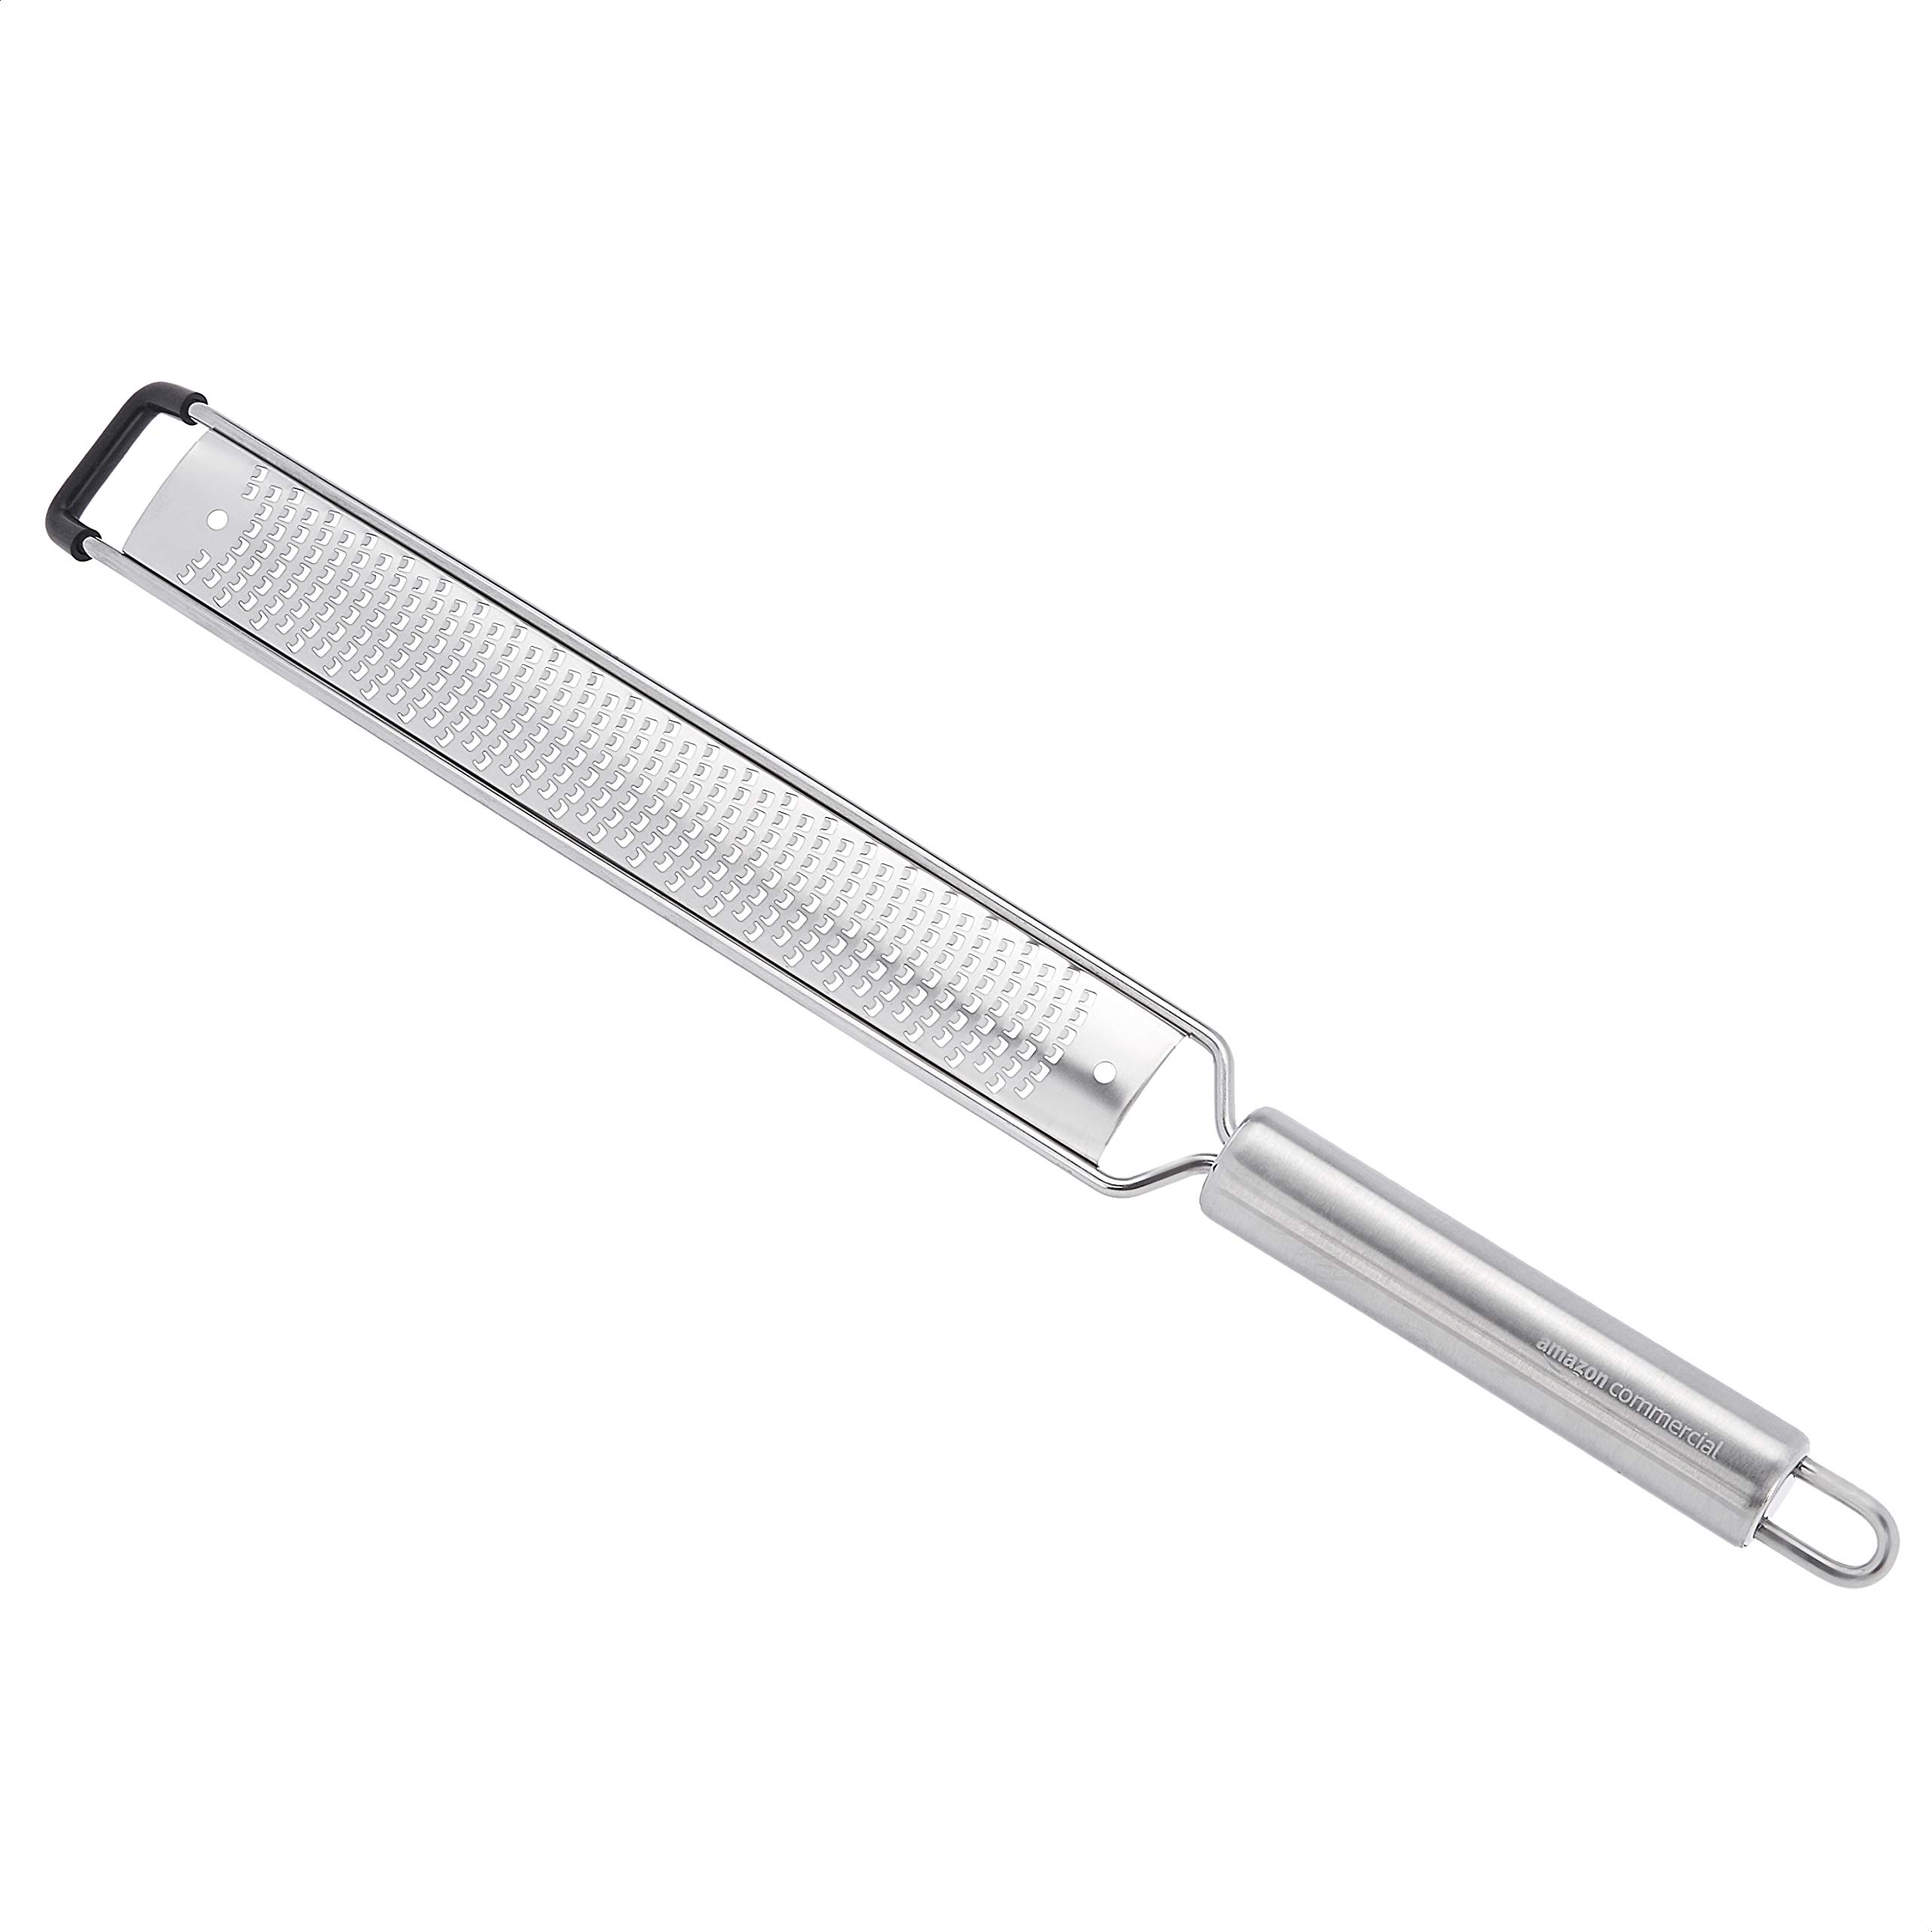 AmazonCommercial Stainless Steel Fine Grater & Zester, Narrow Blade $4